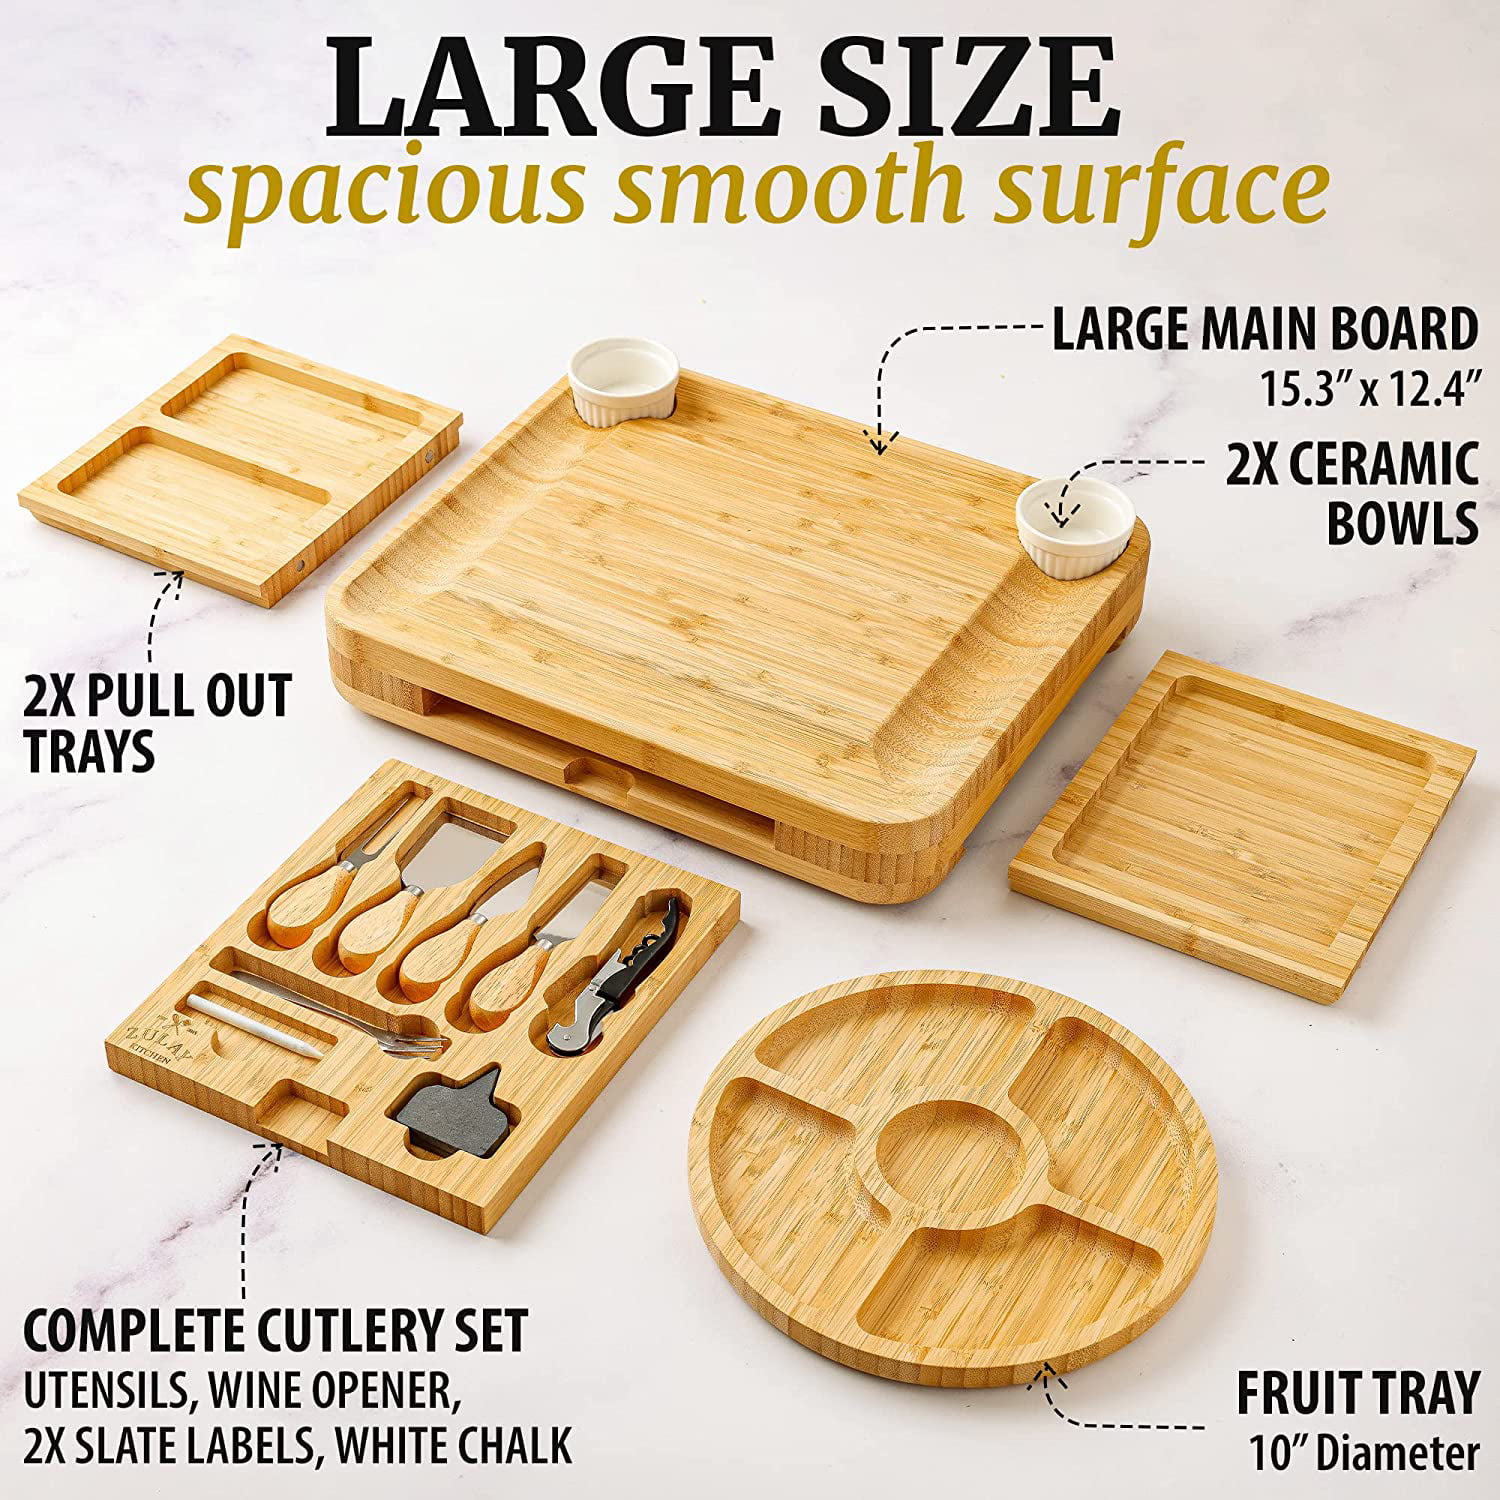 Shop Deluxe Cheese Board Sets on  Sale Right Now